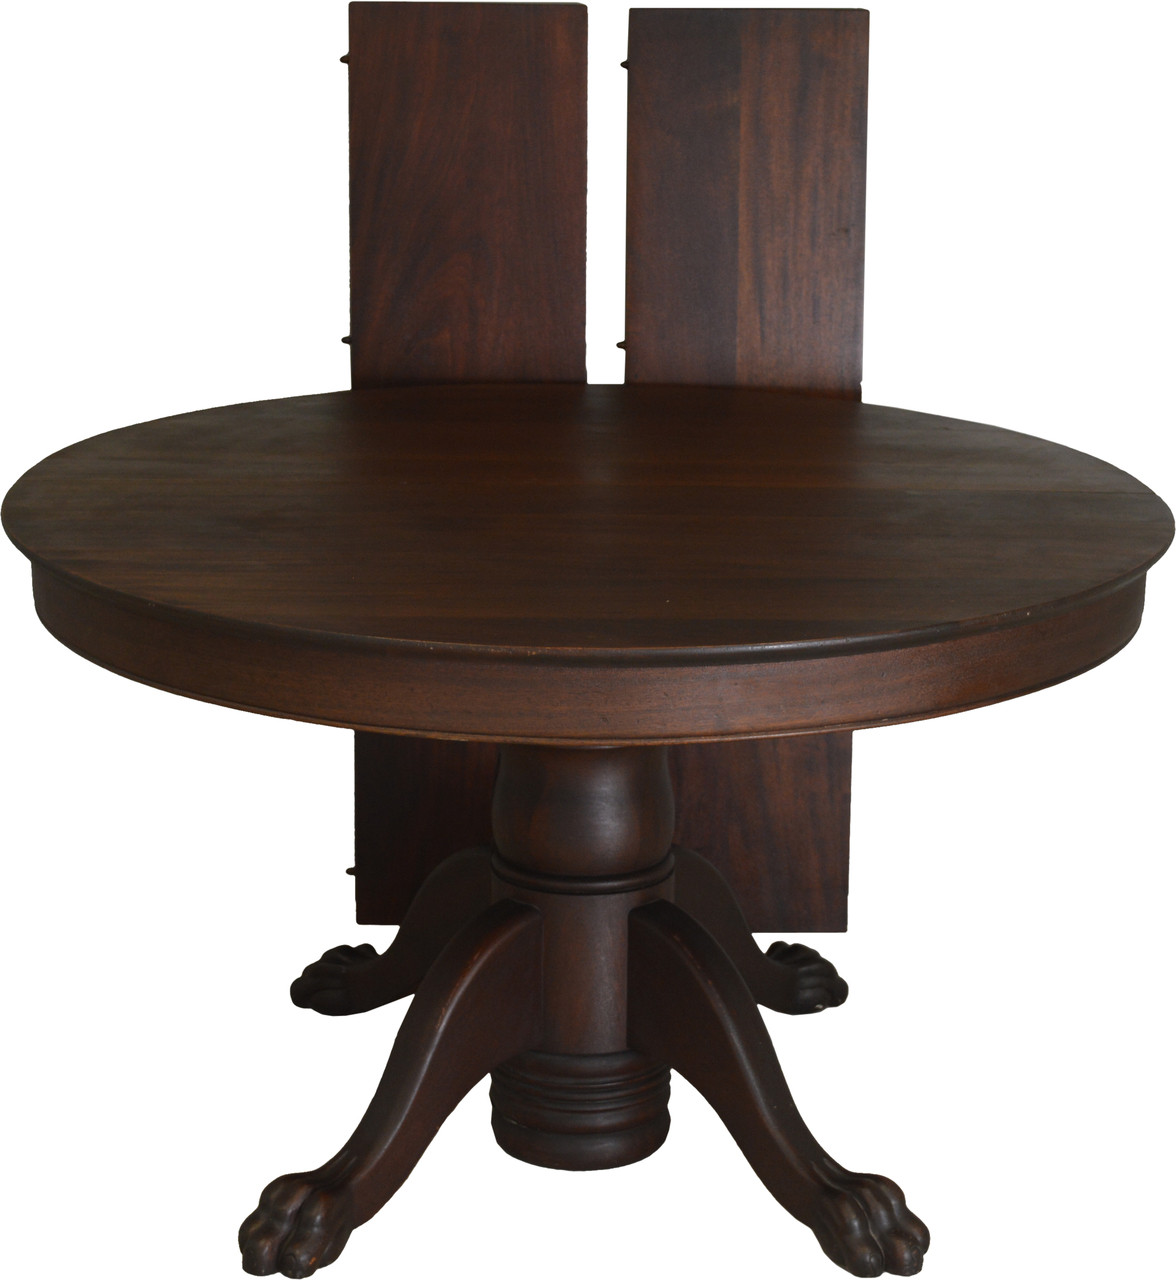 Sold Victorian Mahogany Claw Foot 48 Dining Table 8 Feet Long